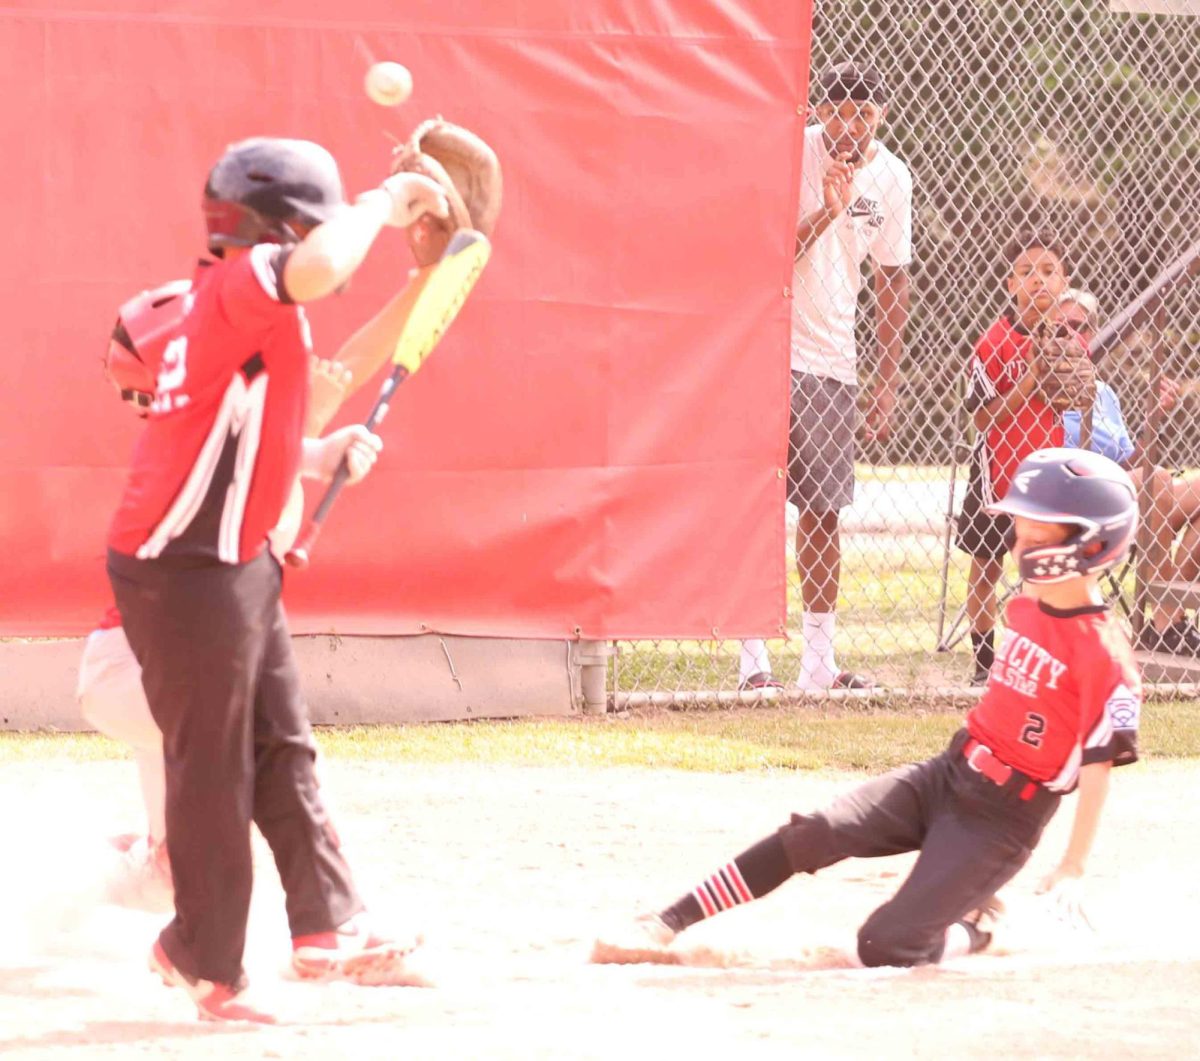 Tri Citys Truett Baldwin slid home with a run after a wild pitch in District 4 East Tournament (ages 9-10) action Sunday. Tri City advanced with a 13-10 victory.